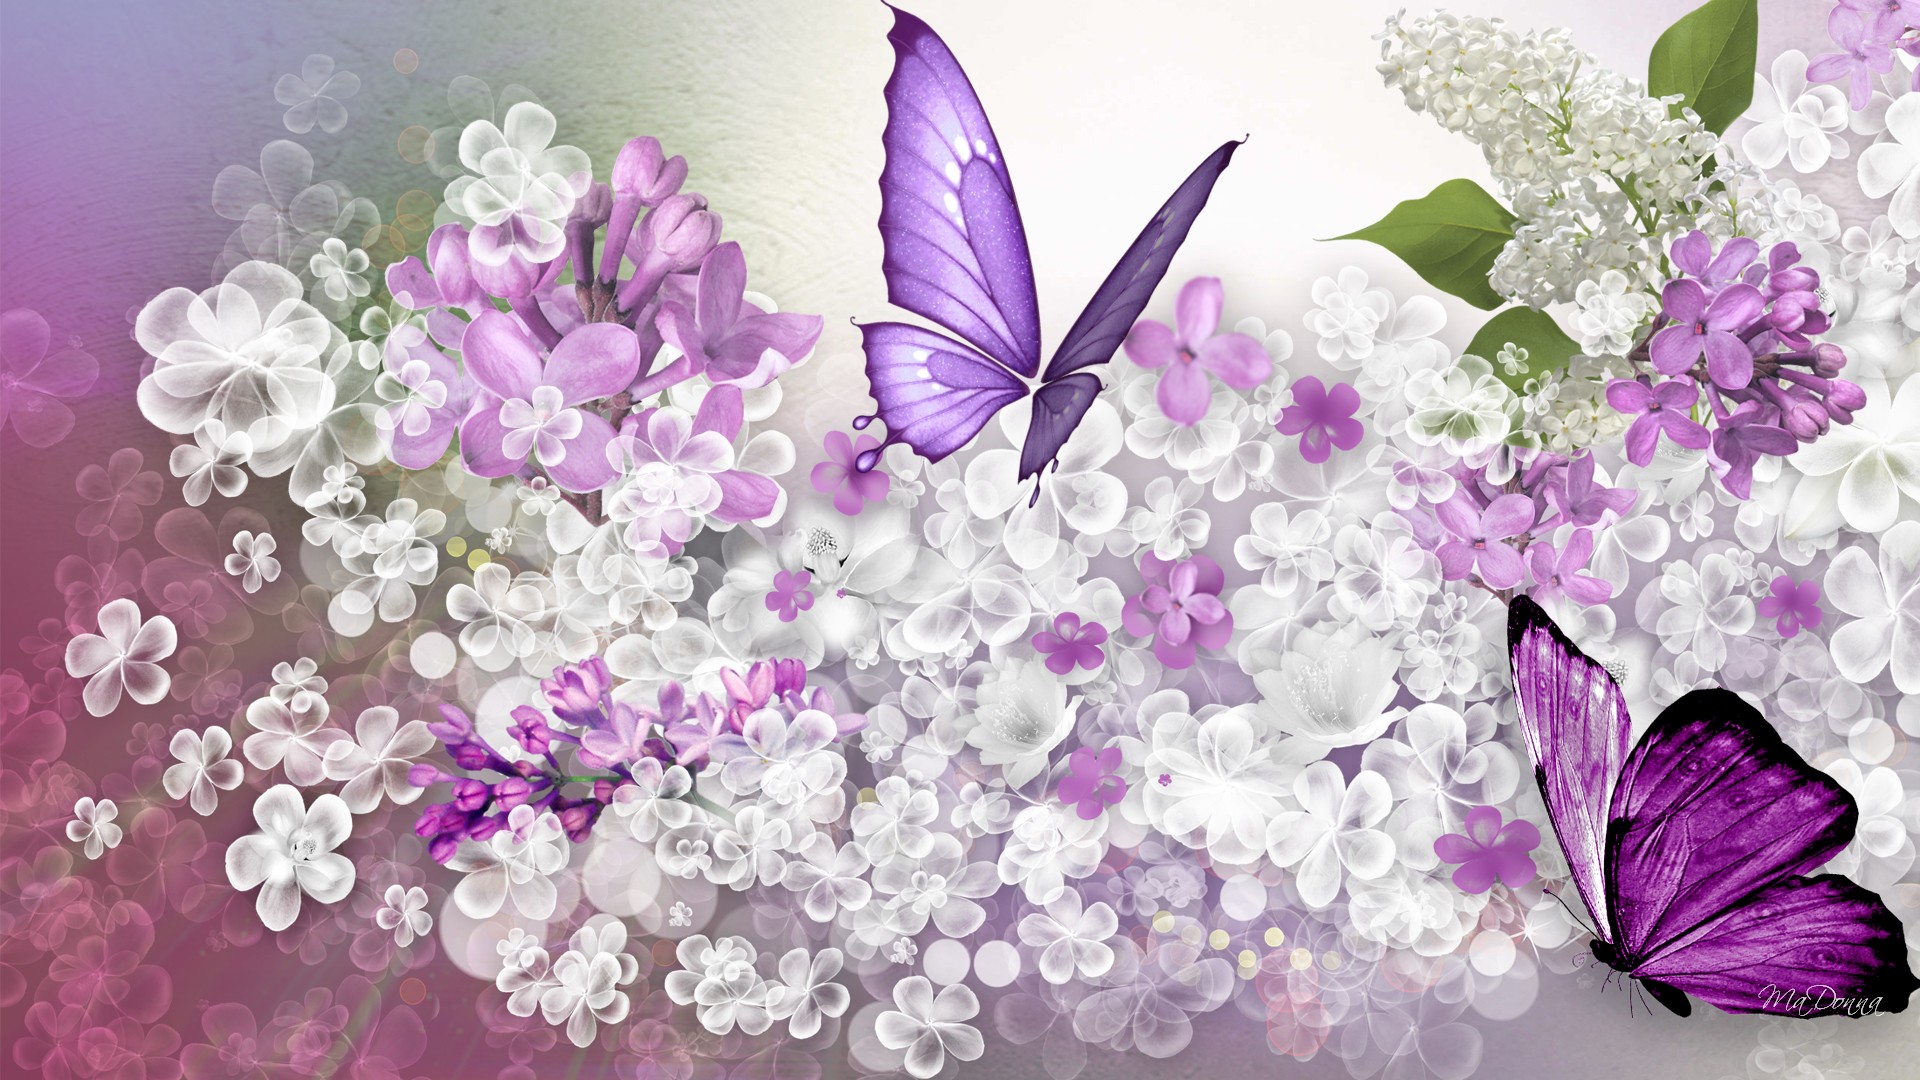 Lilac Flowers Windows 81 Theme and Pictures All for Windows 10 Free